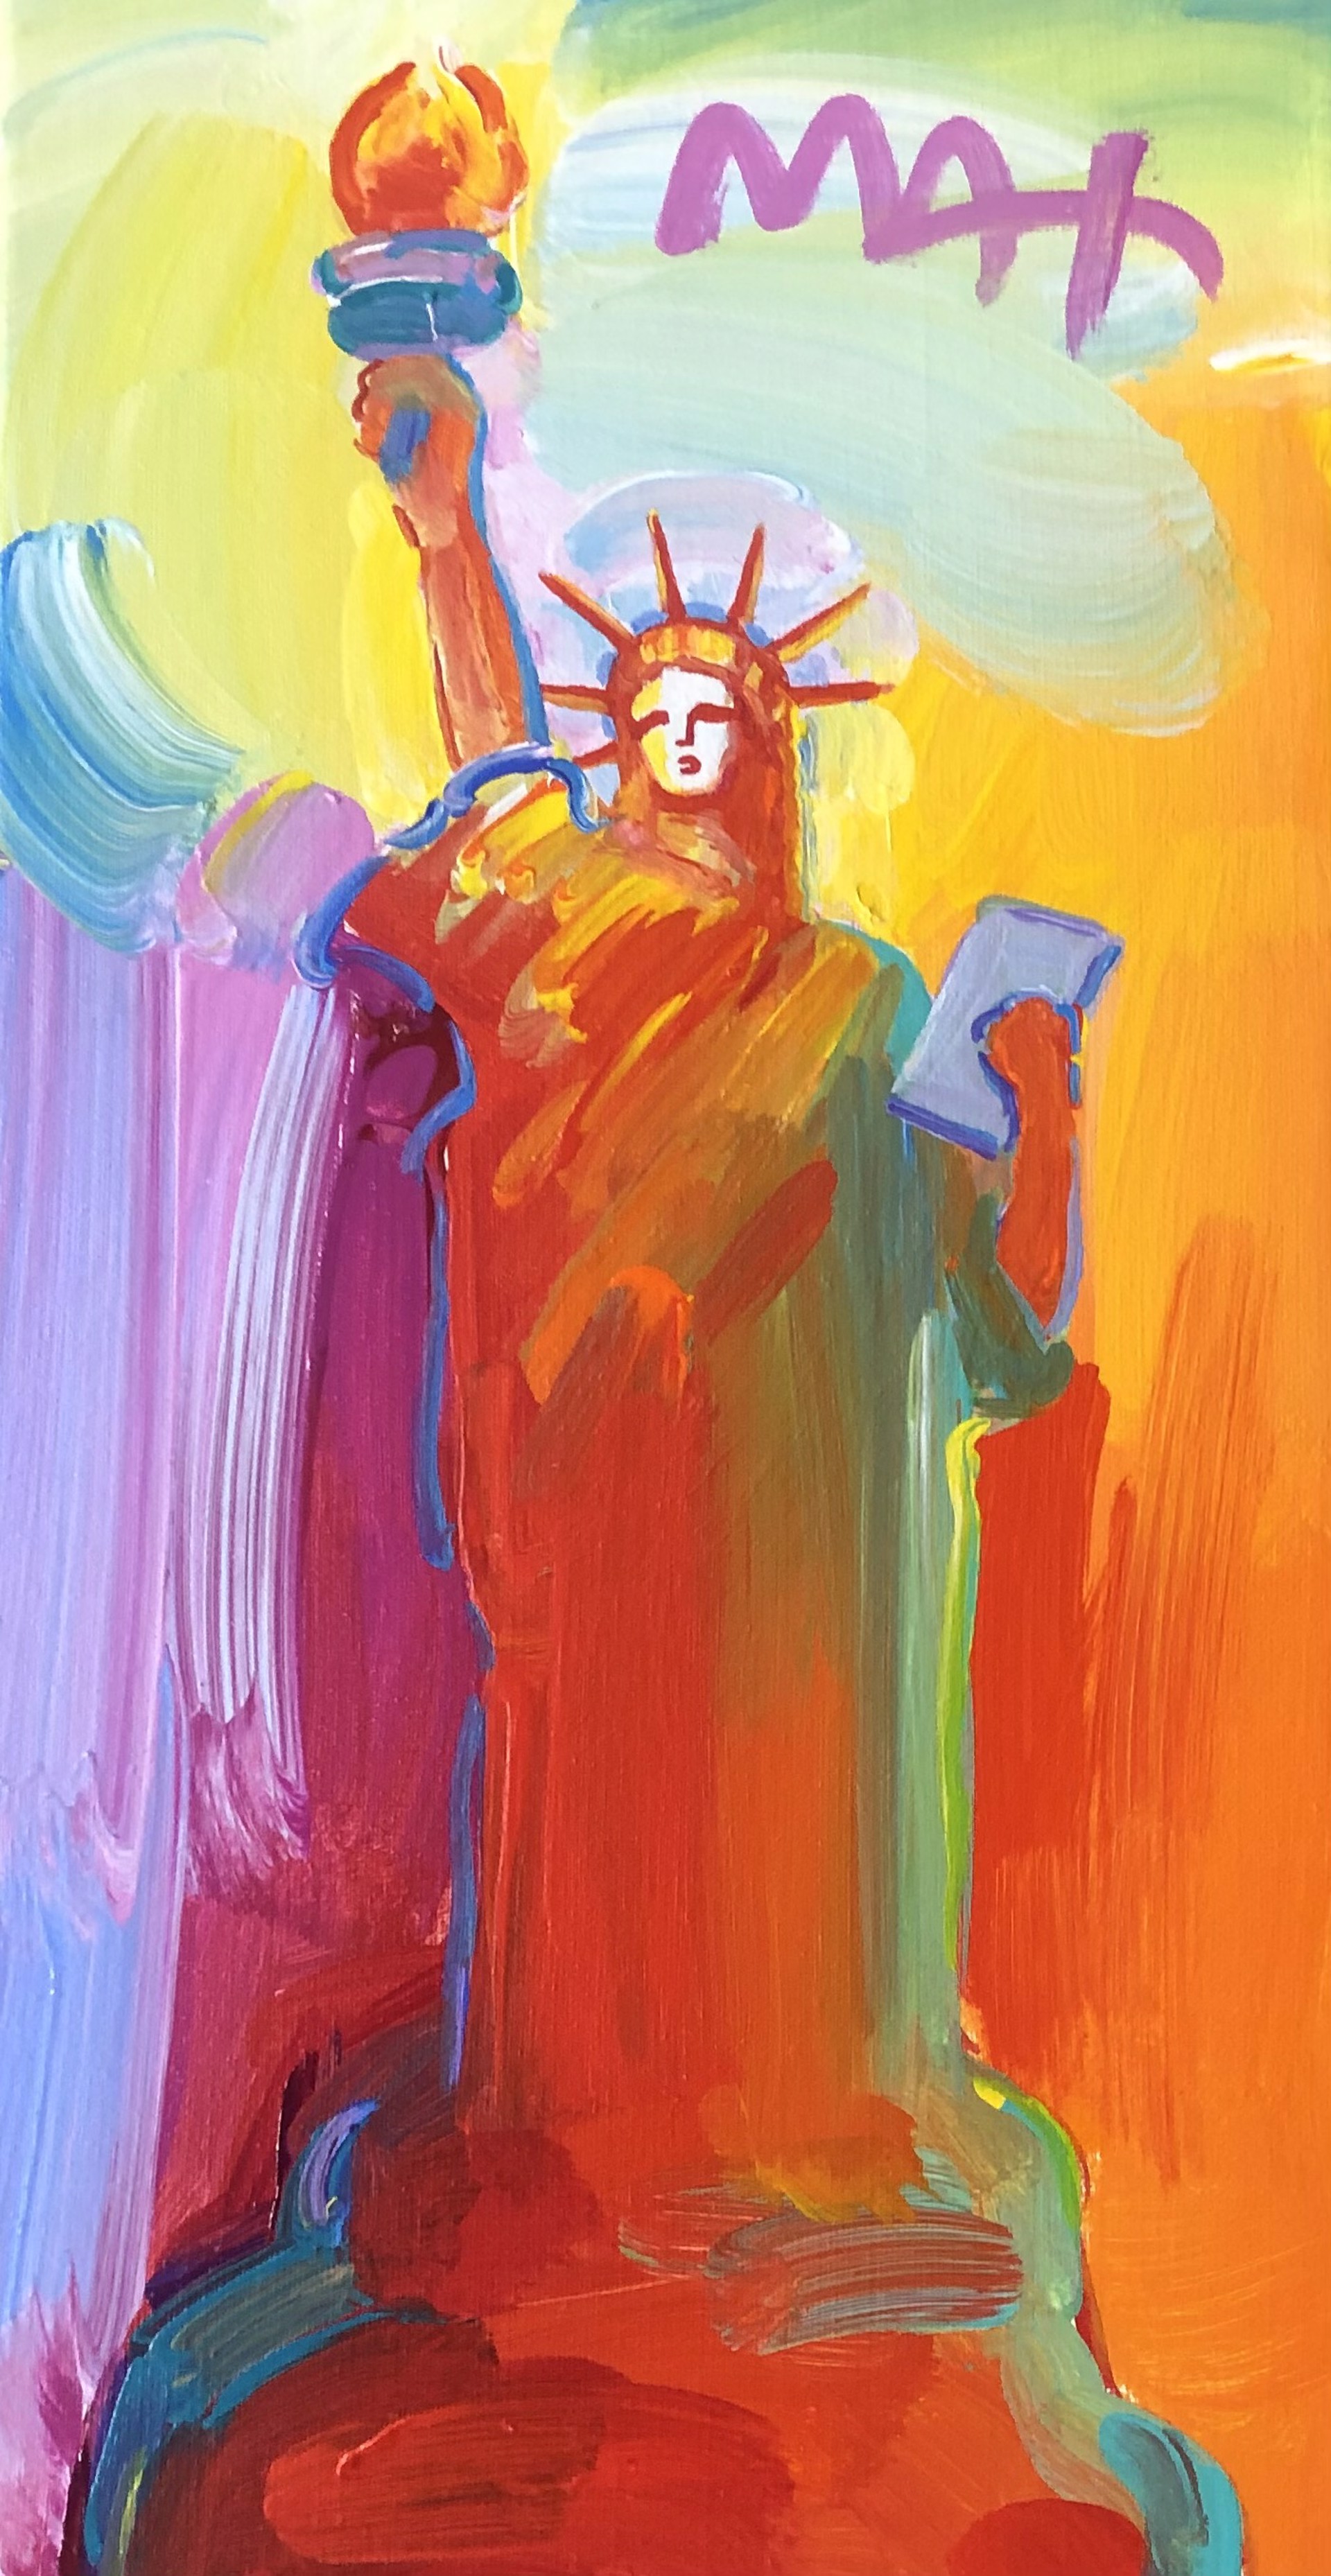 Statue of Liberty by Peter Max